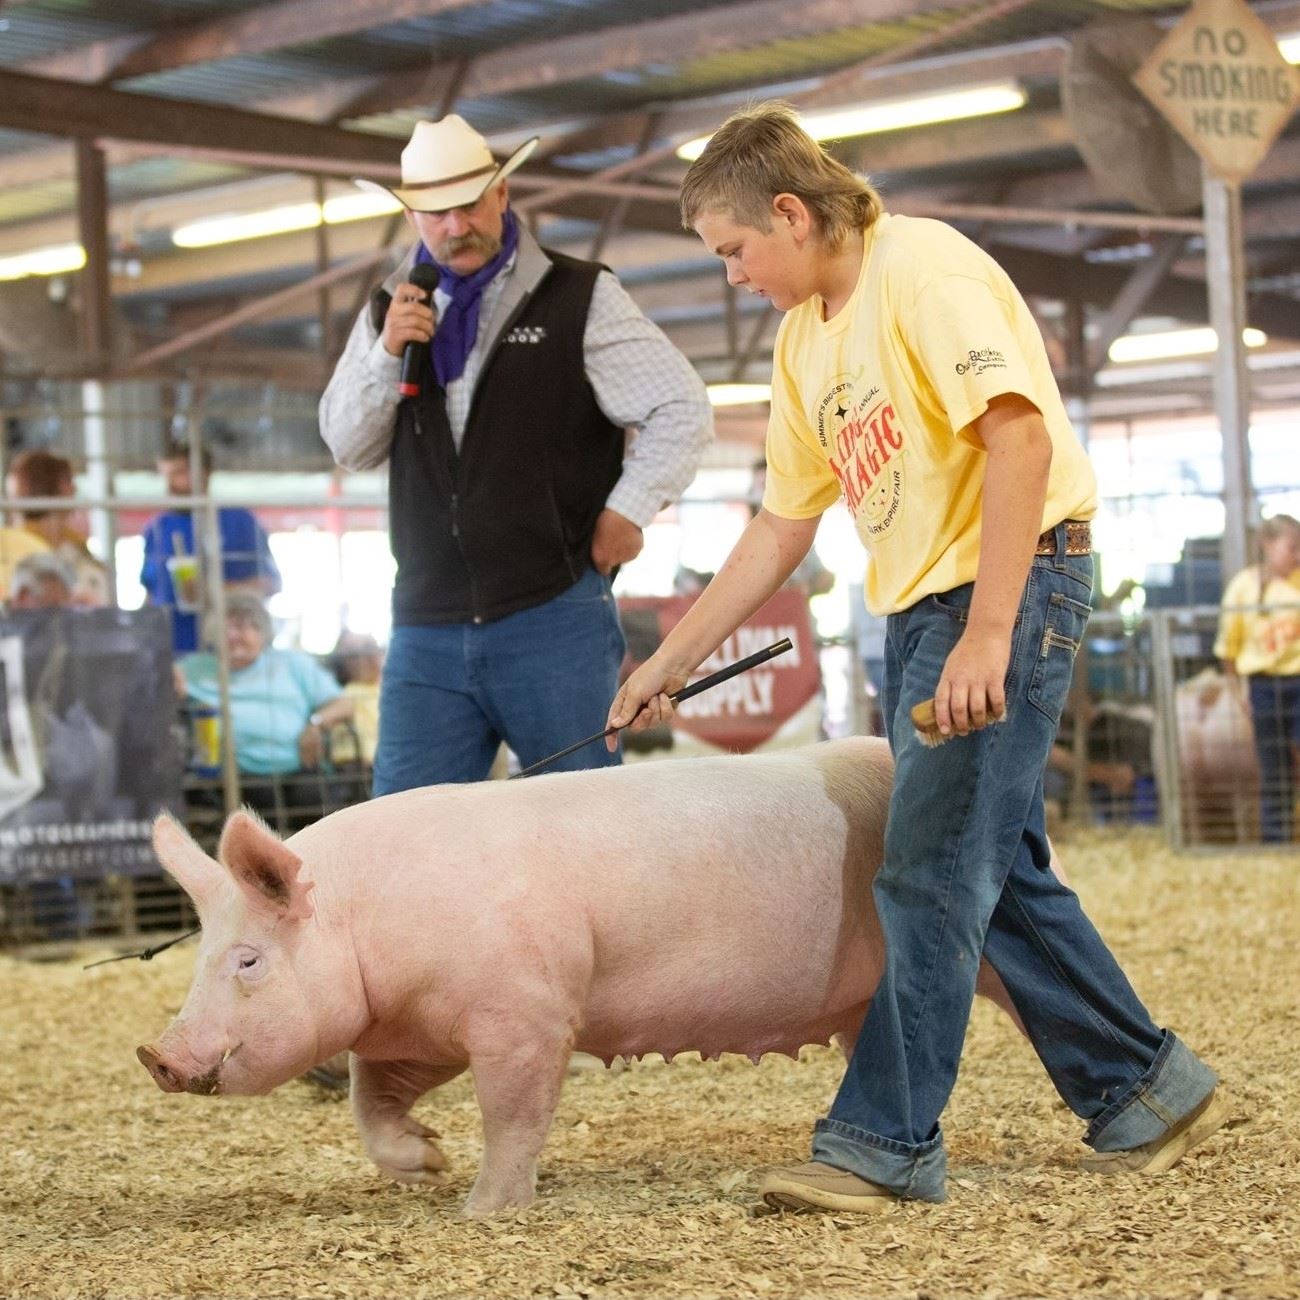 Boy showing a white pig while the judge examines the animal from the background.